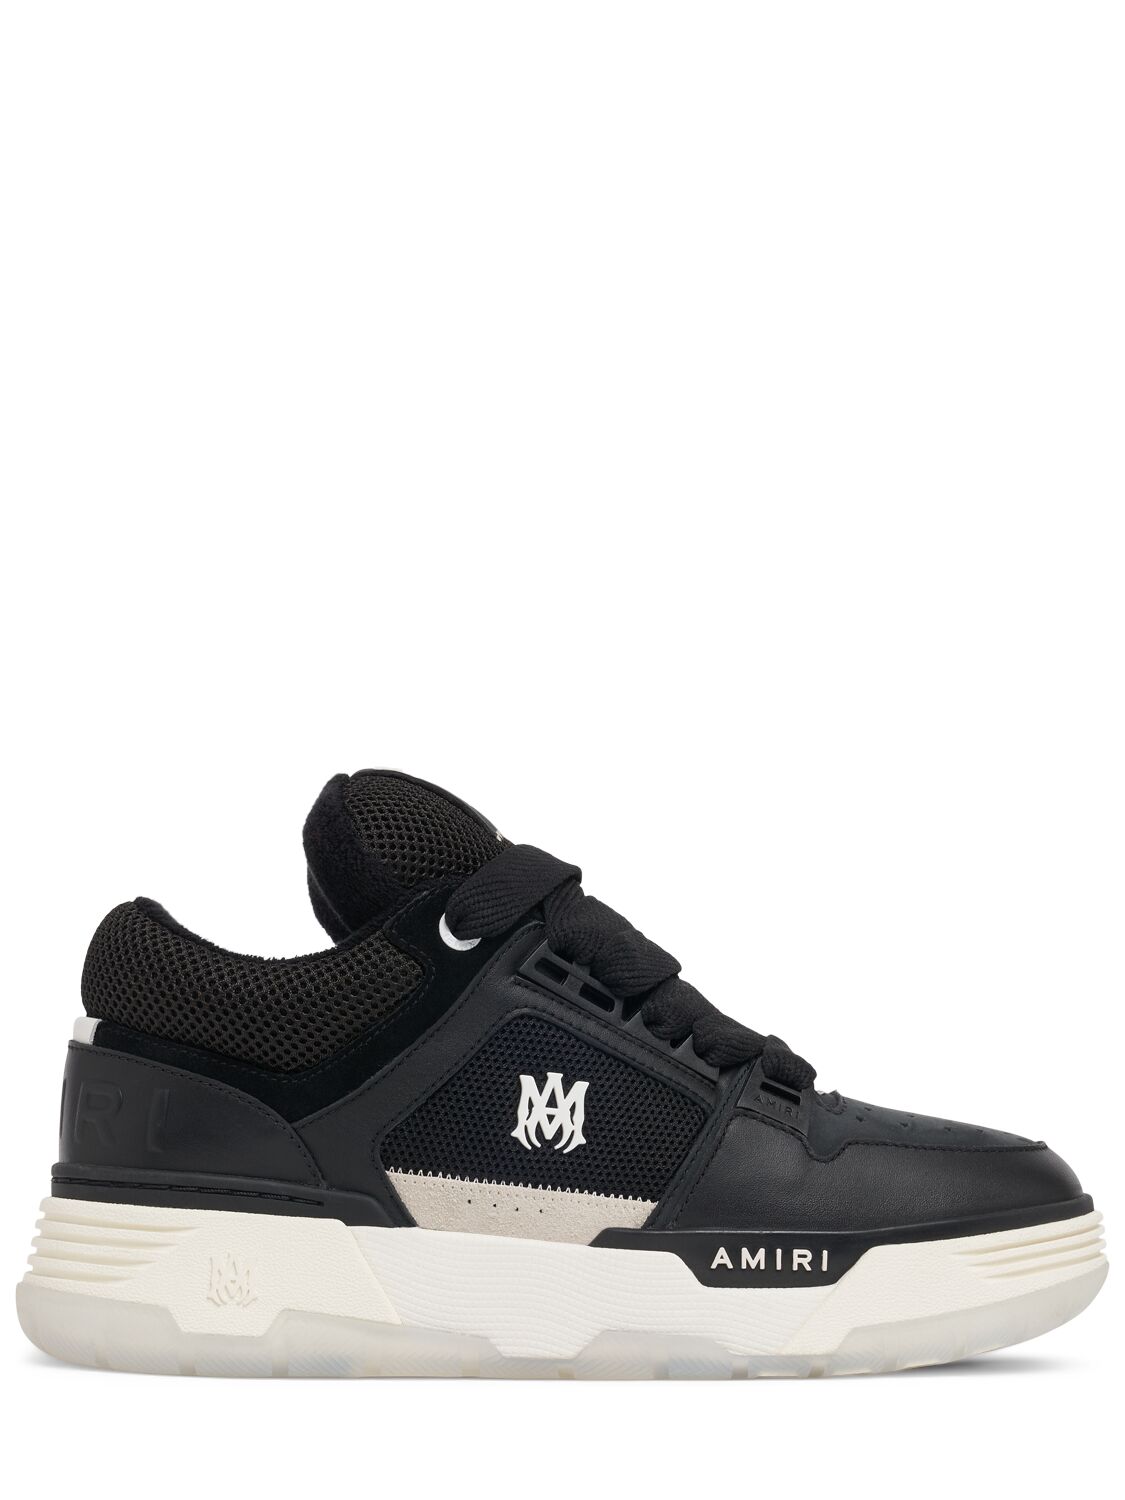 Amiri Ma-1 Leather Low Top Sneakers In Black/white